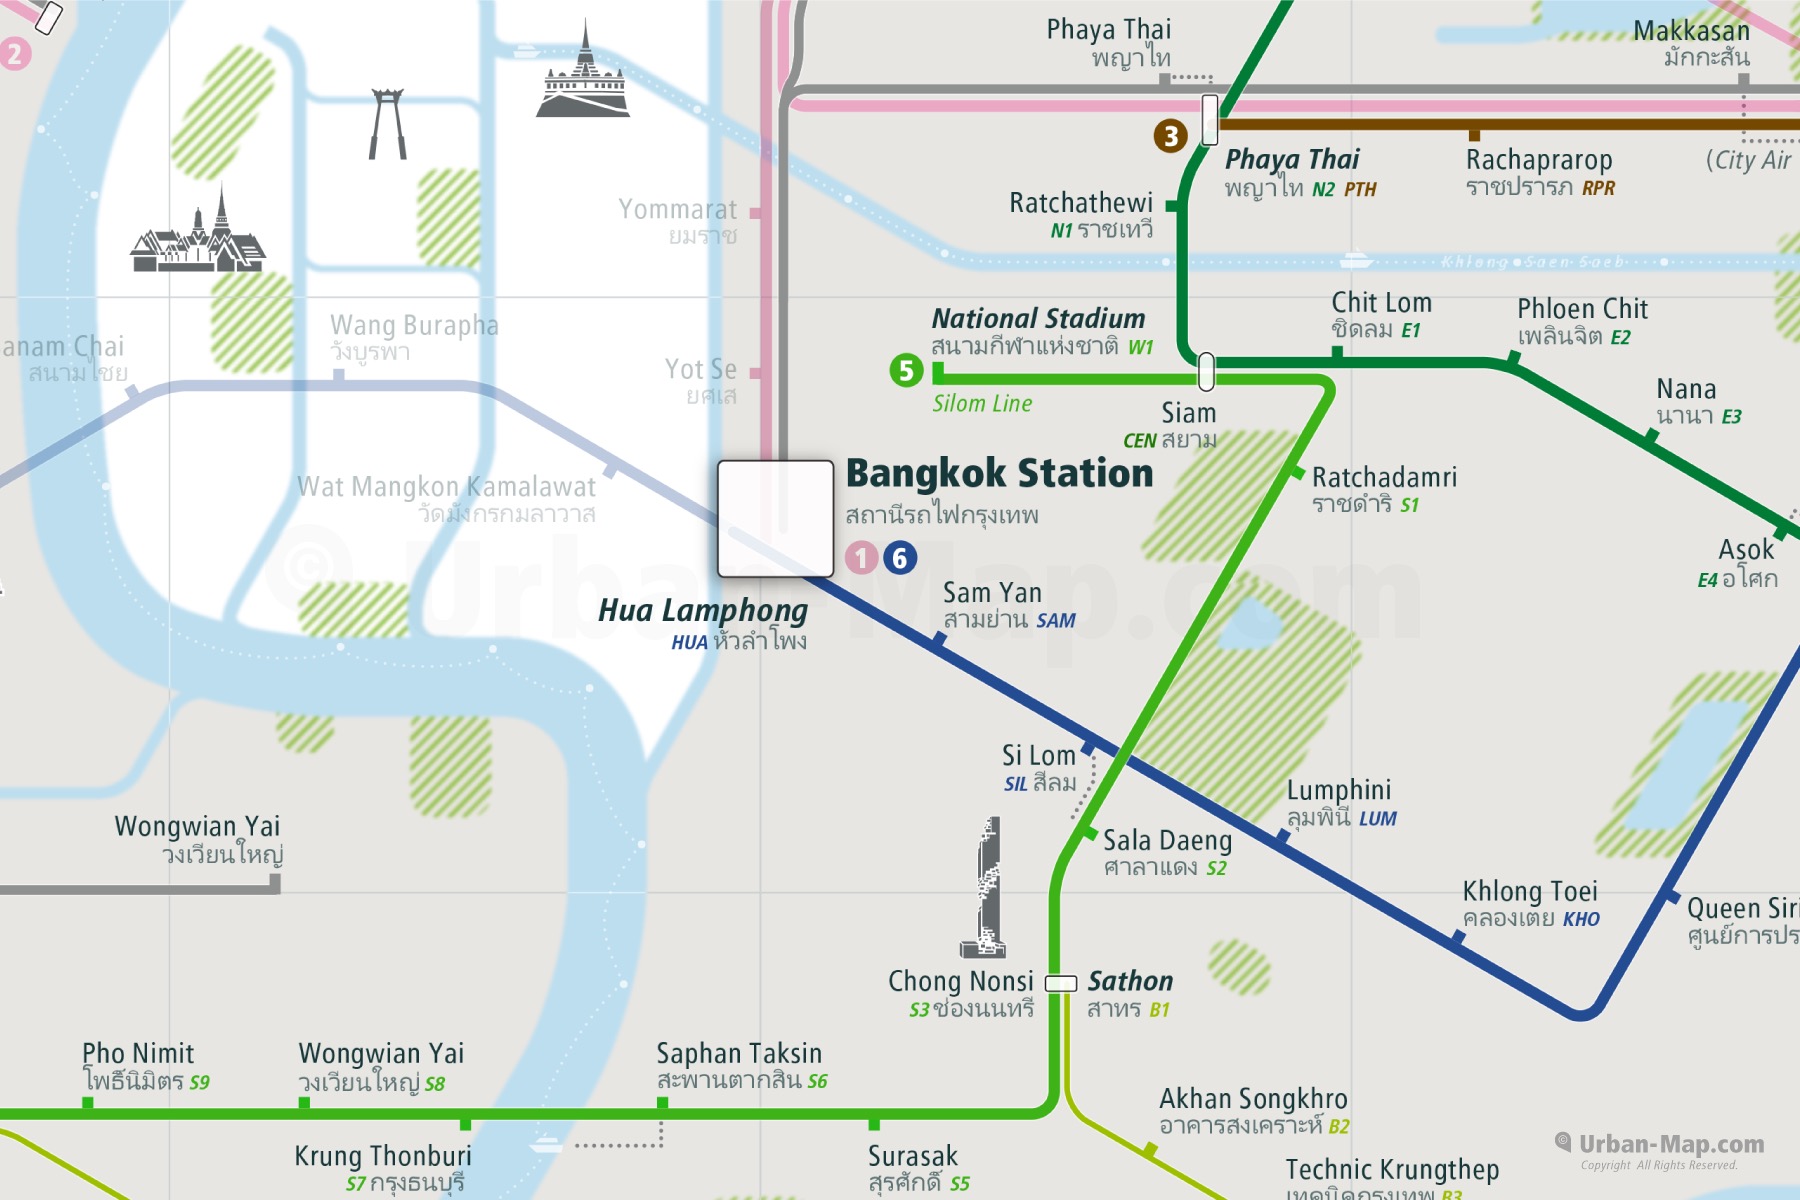 Bangkok City Rail Map shows the train and public transportation routes of metro, BRT Bus Rapid Transport, Airport Link - Close-Up